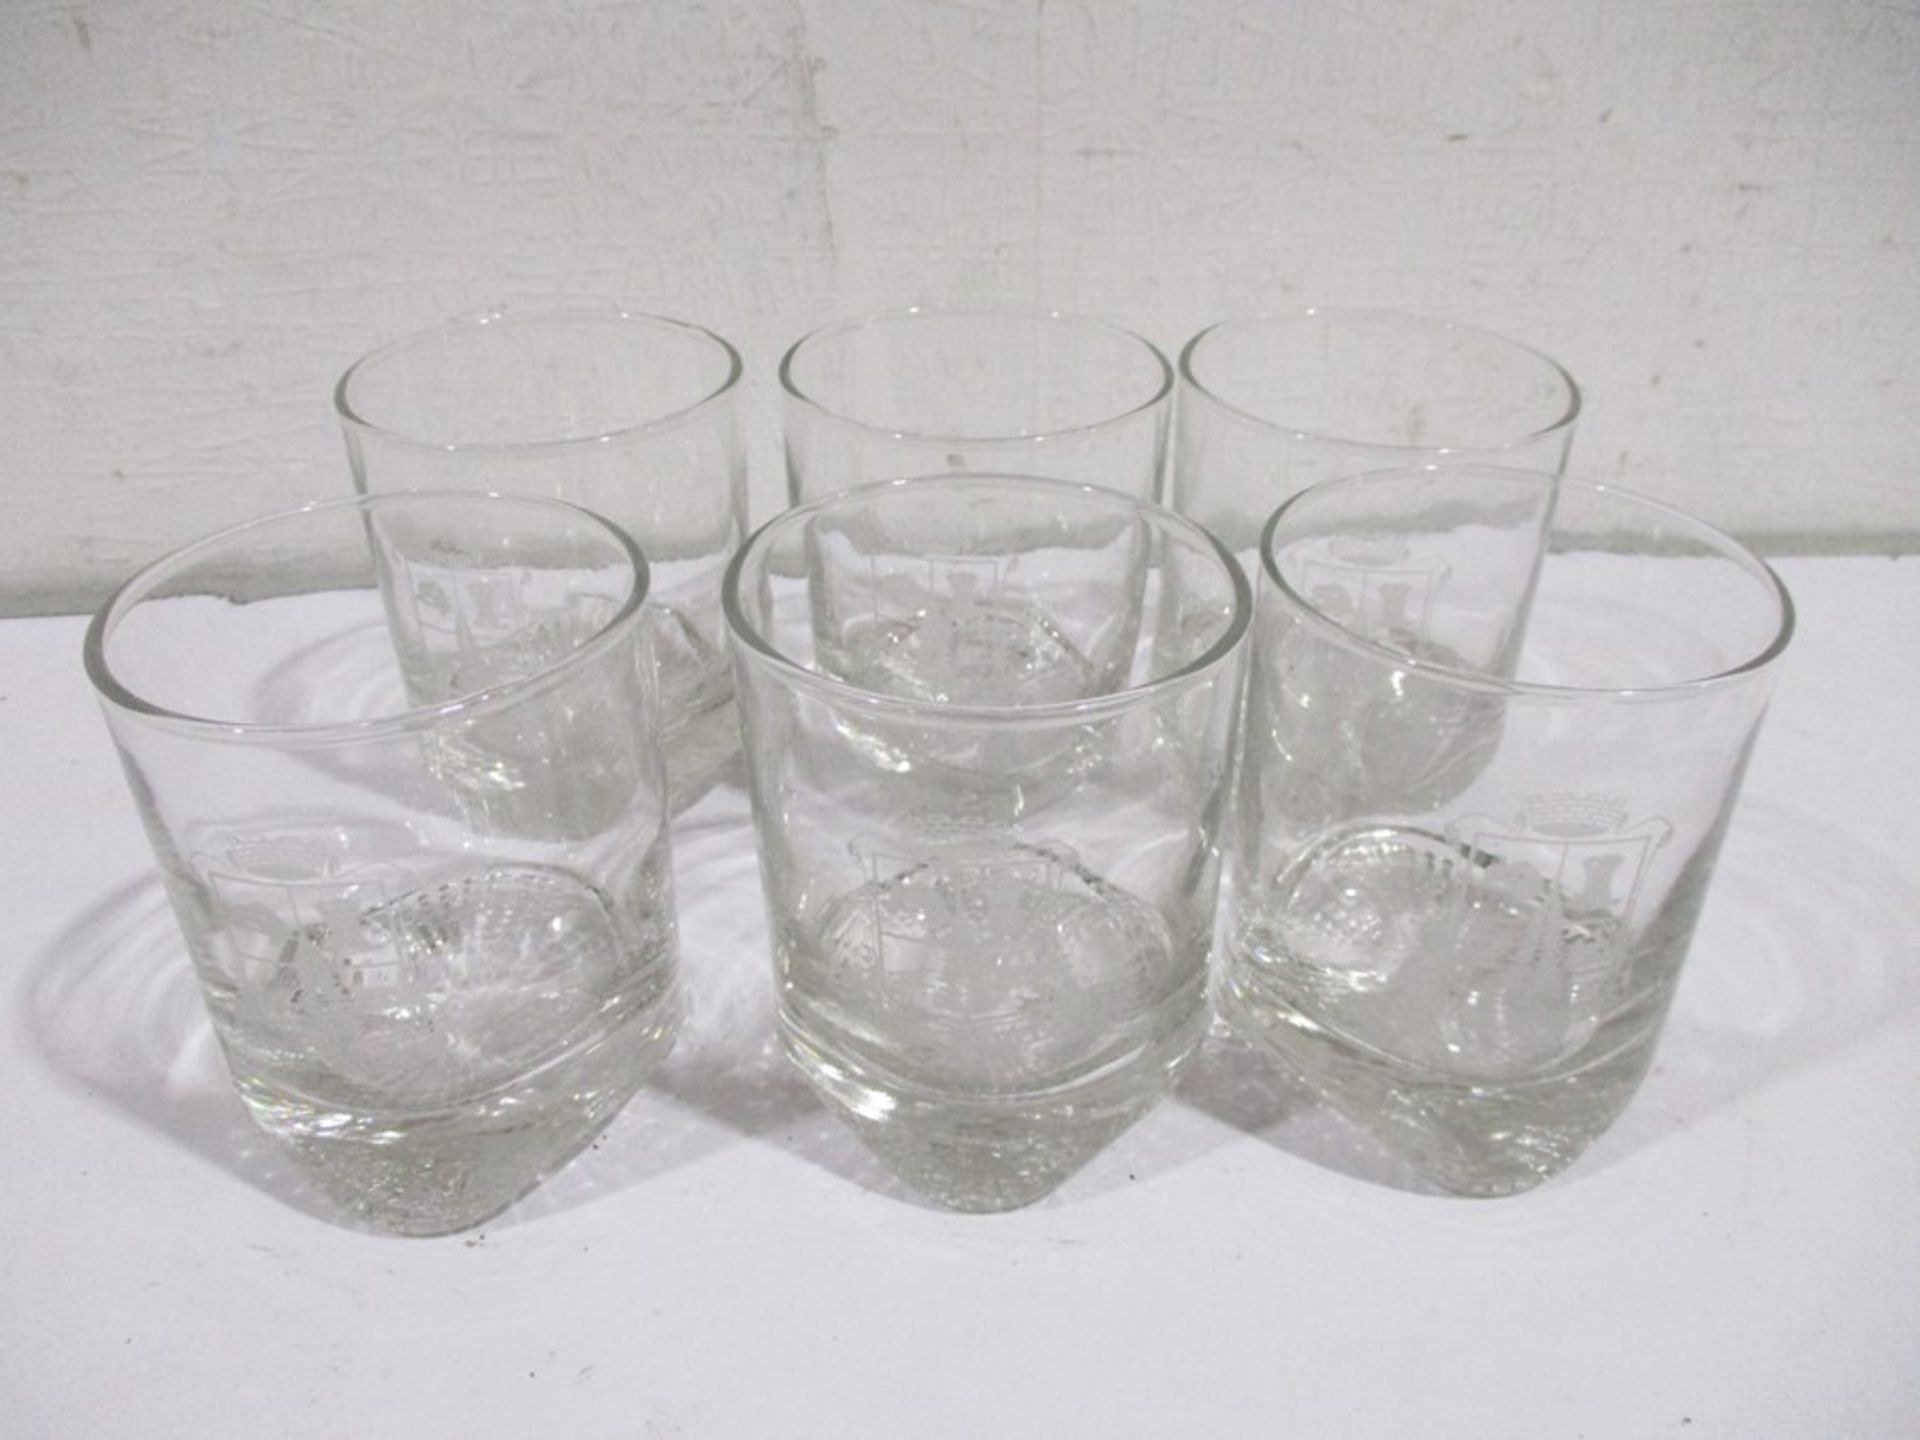 A large quantity of glassware in two boxes including tumblers, martini glasses etc. - Image 15 of 19